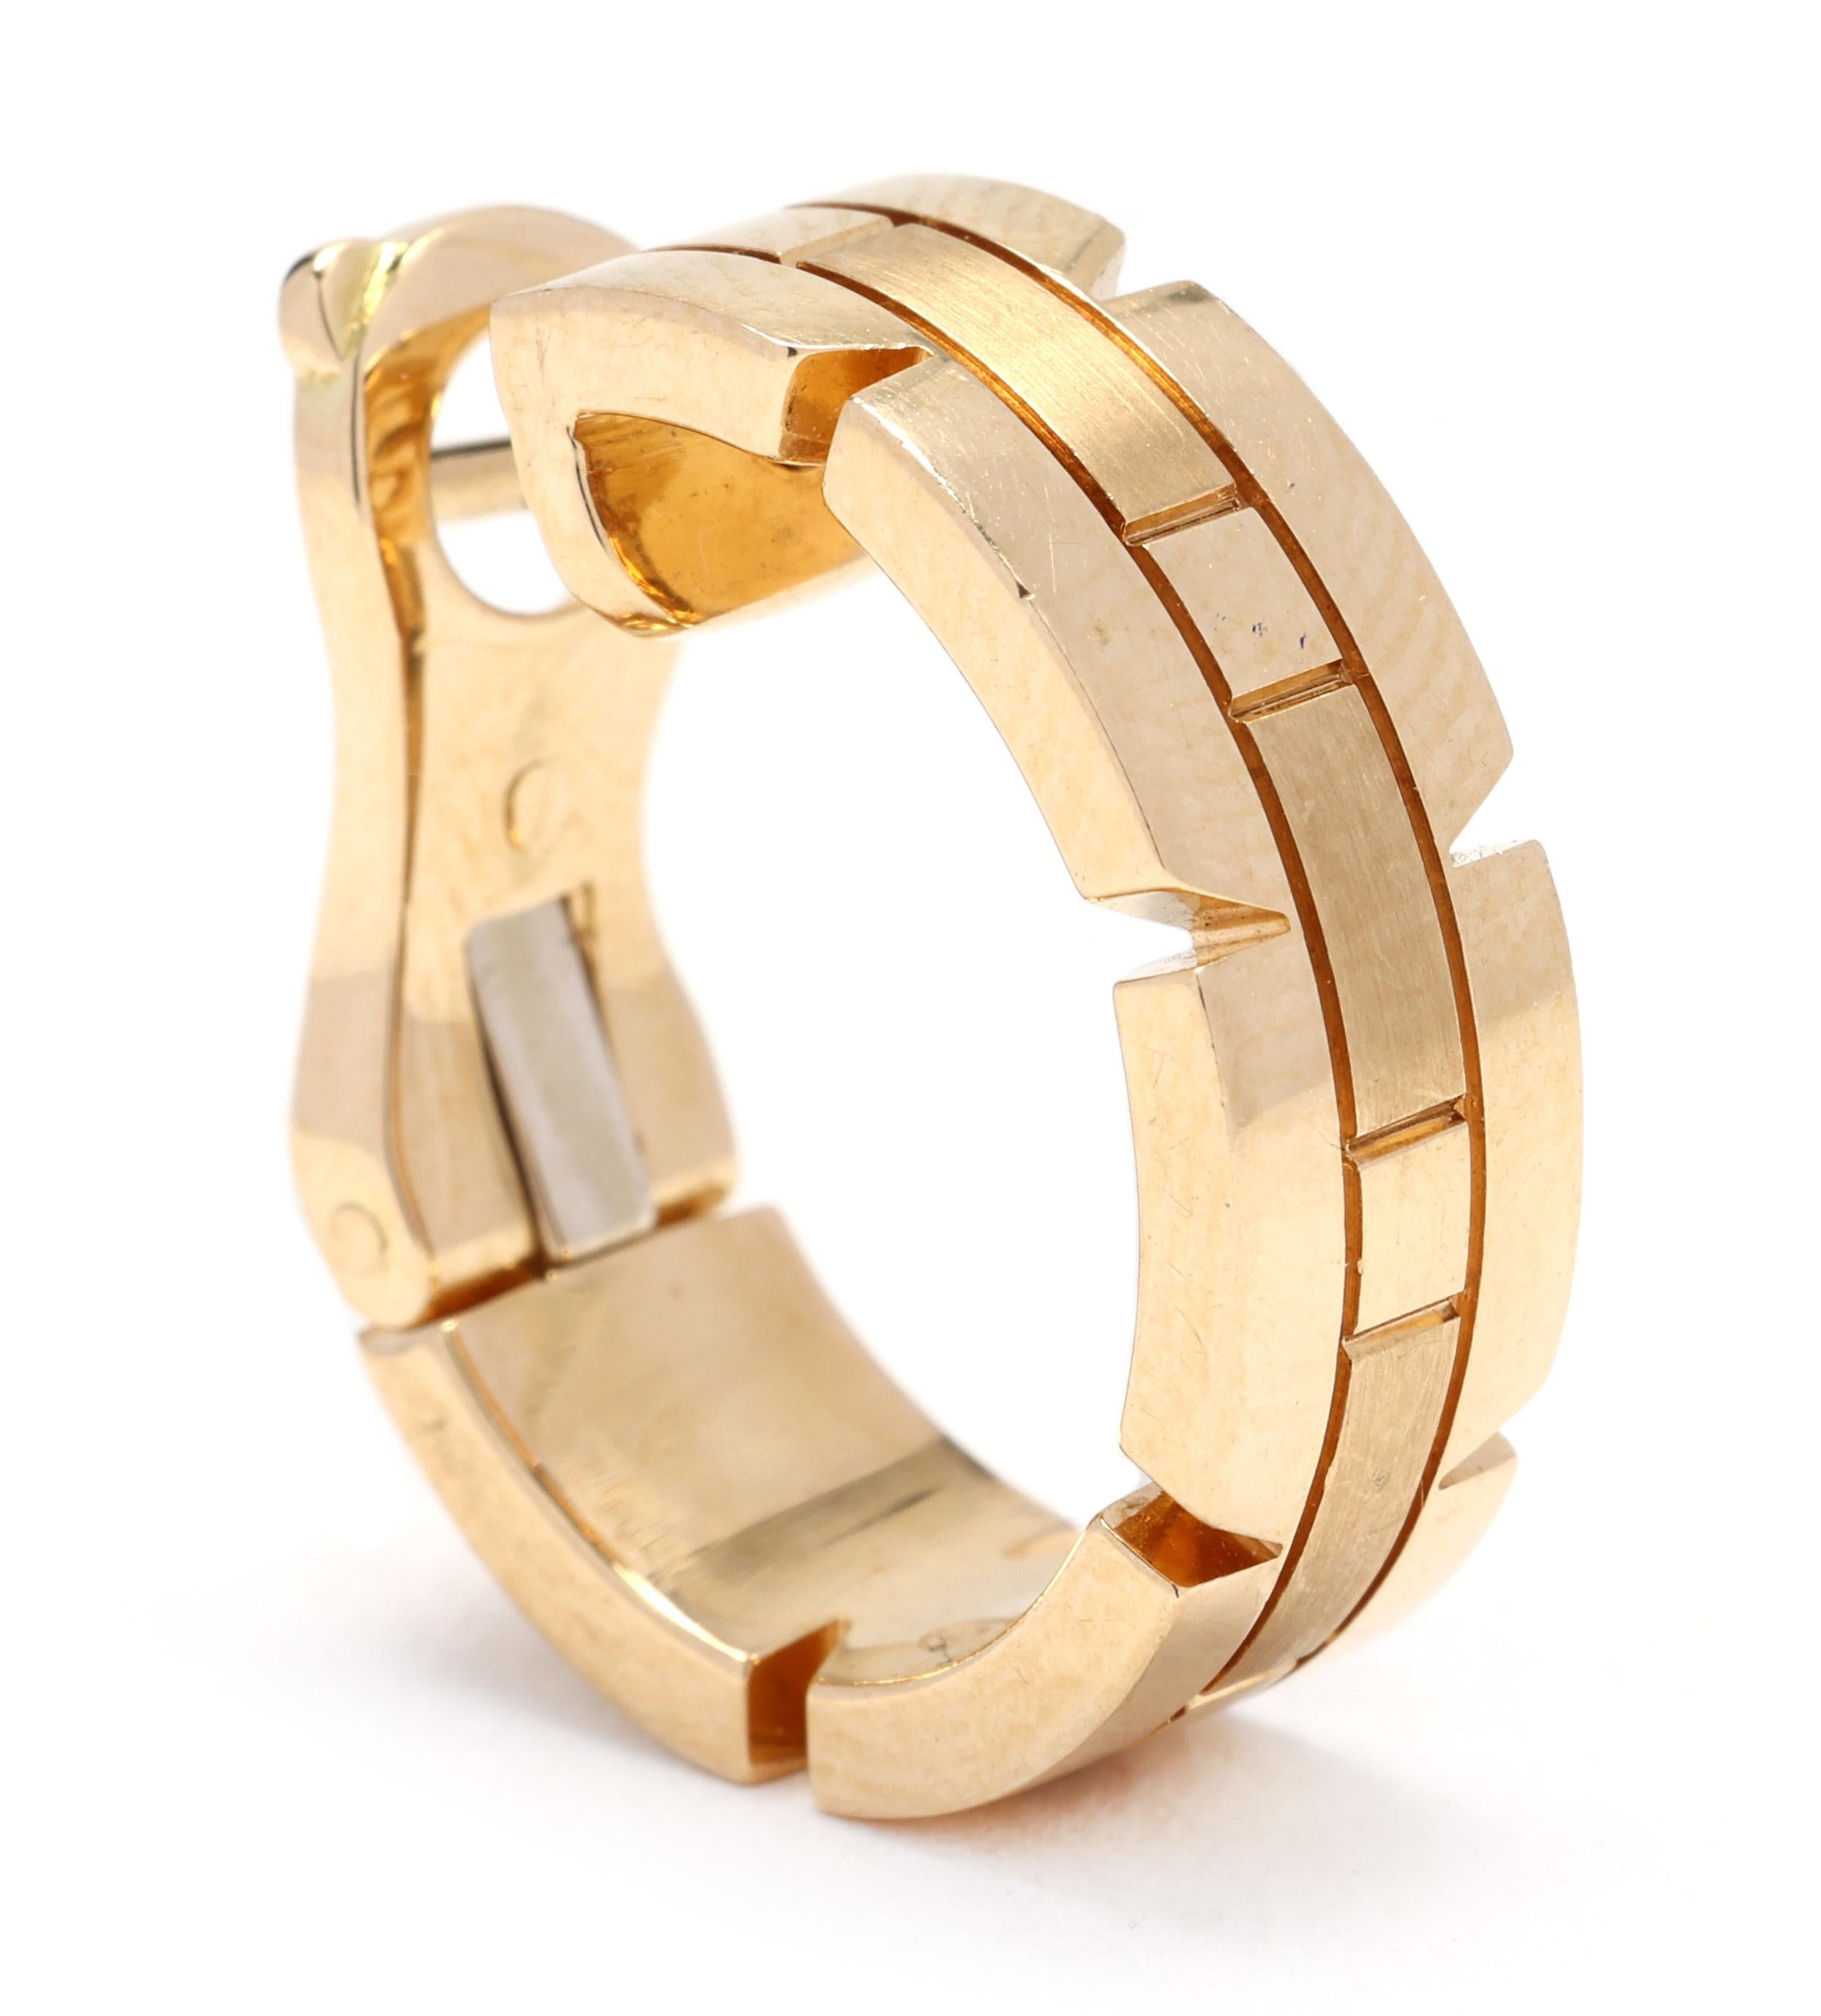 Make a bold statement with these Cartier Gold Hoop Earrings from the iconic Maillon Panther Collection. Crafted from 18k yellow gold, these earrings feature a unique and intricate design inspired by the strength and elegance of a panther's